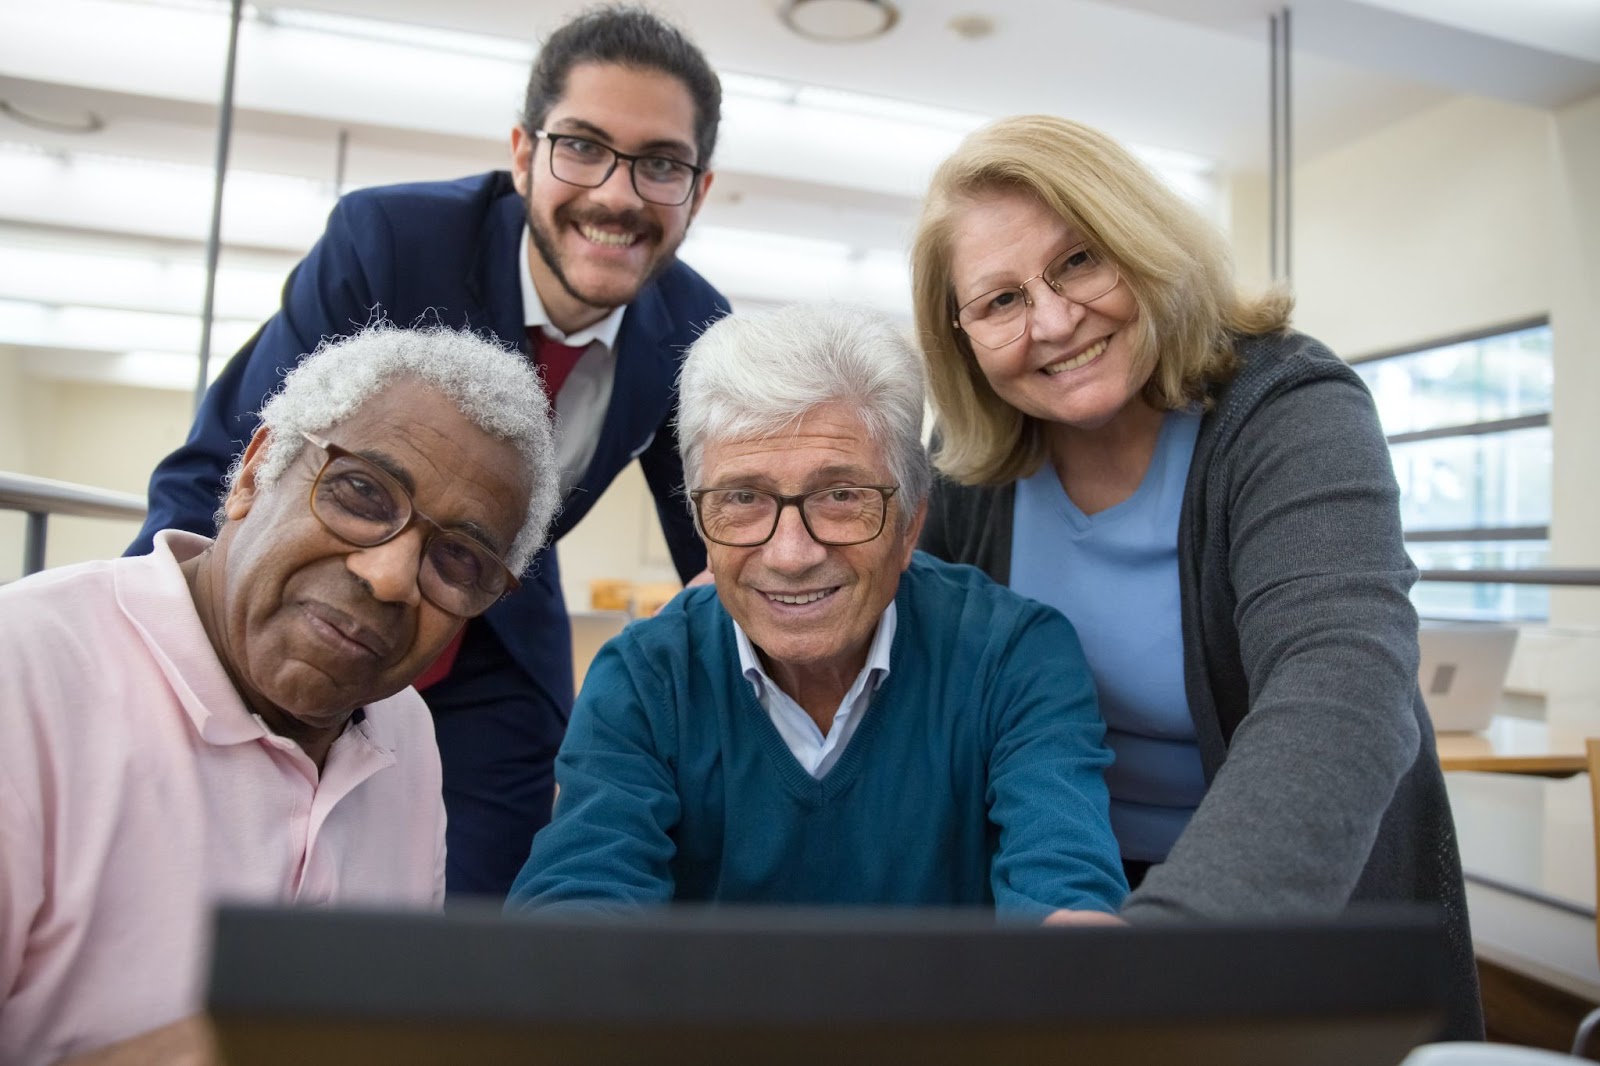 A group of seniors behind a desktop computer with a person in a suit standing in the background